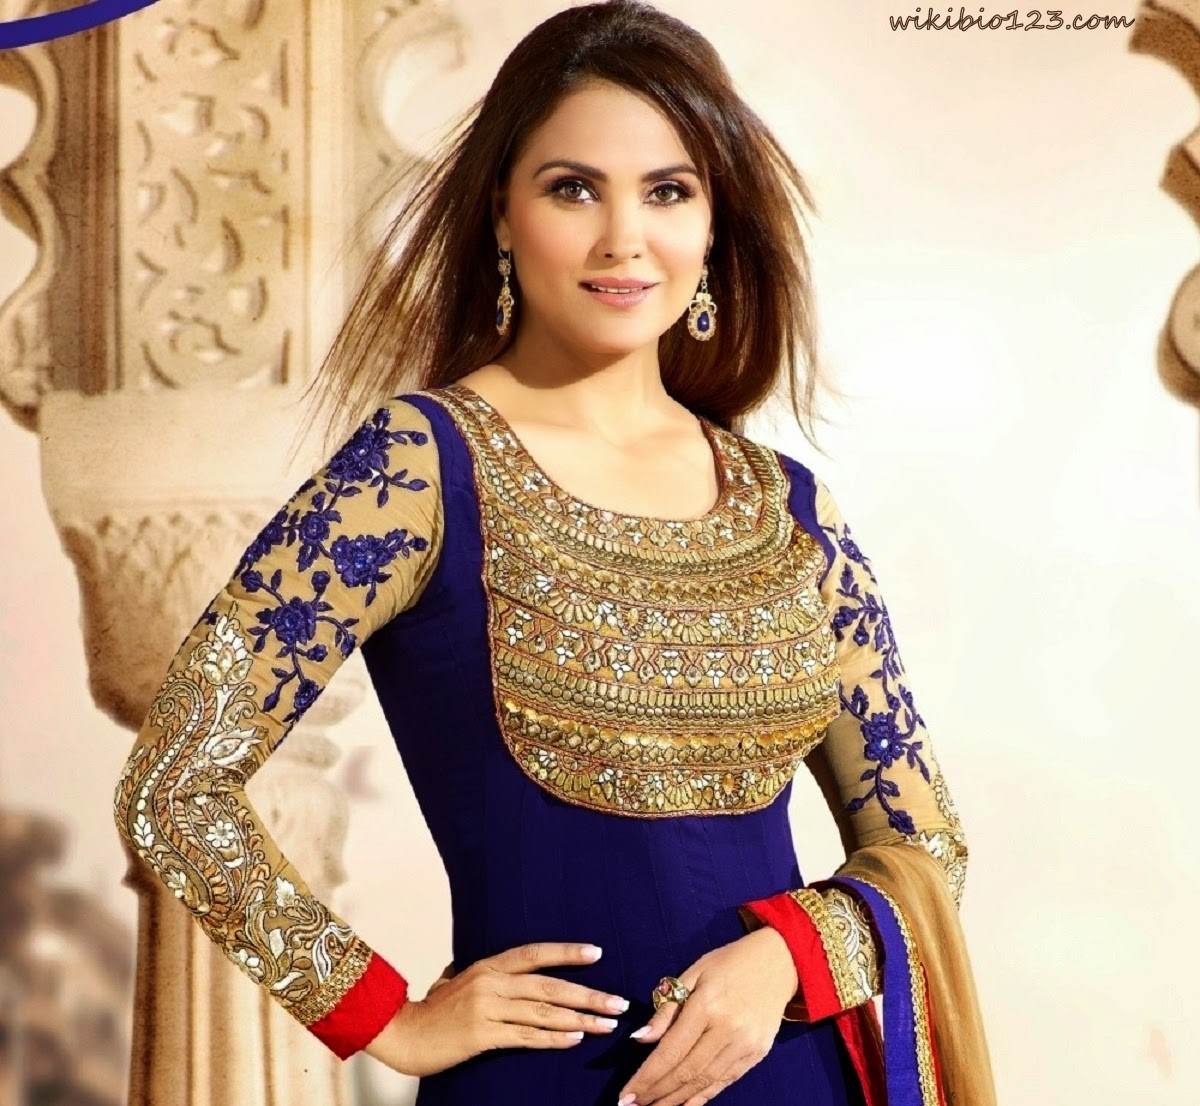 Lara Dutta wiki Bio Age Figure size Height HD Images Wallpapers Download